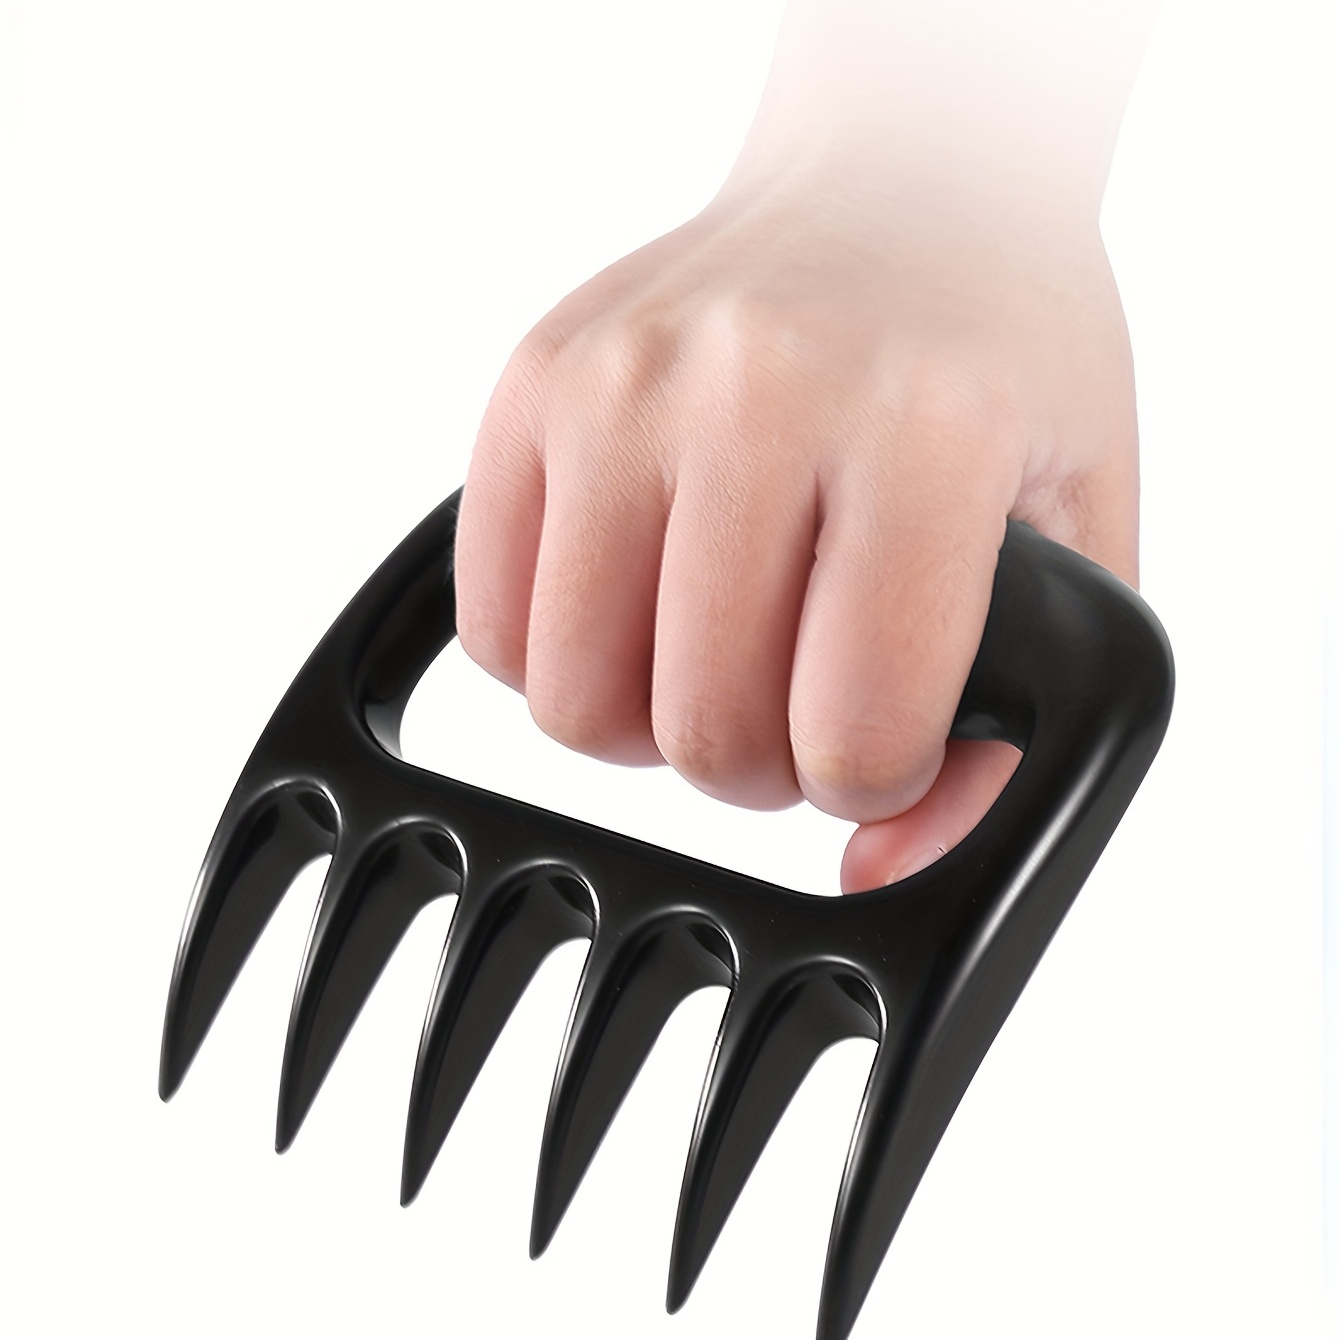 Original Shredder Barbecue Claws, Easily Lift, Handle, Shred, And Cut Meats  Ultra-sharp Blades And Heat Resistant, Grilling & Barbecue Utensils - Temu